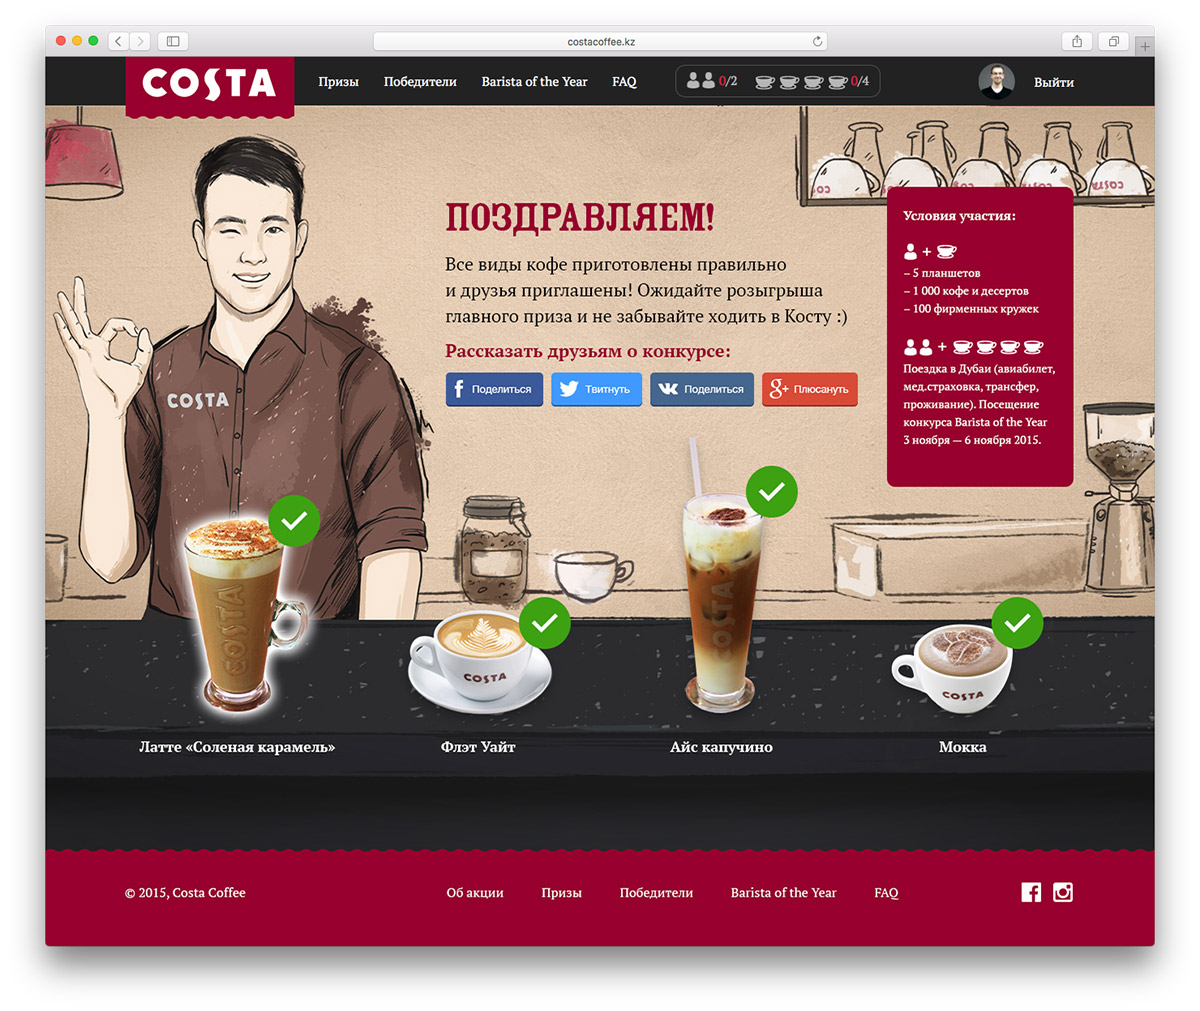 Winking barista tells that the test was successfully passed. Now it is possible to share the results in social media. The friends who referred by the link would multiply the chances to win. 